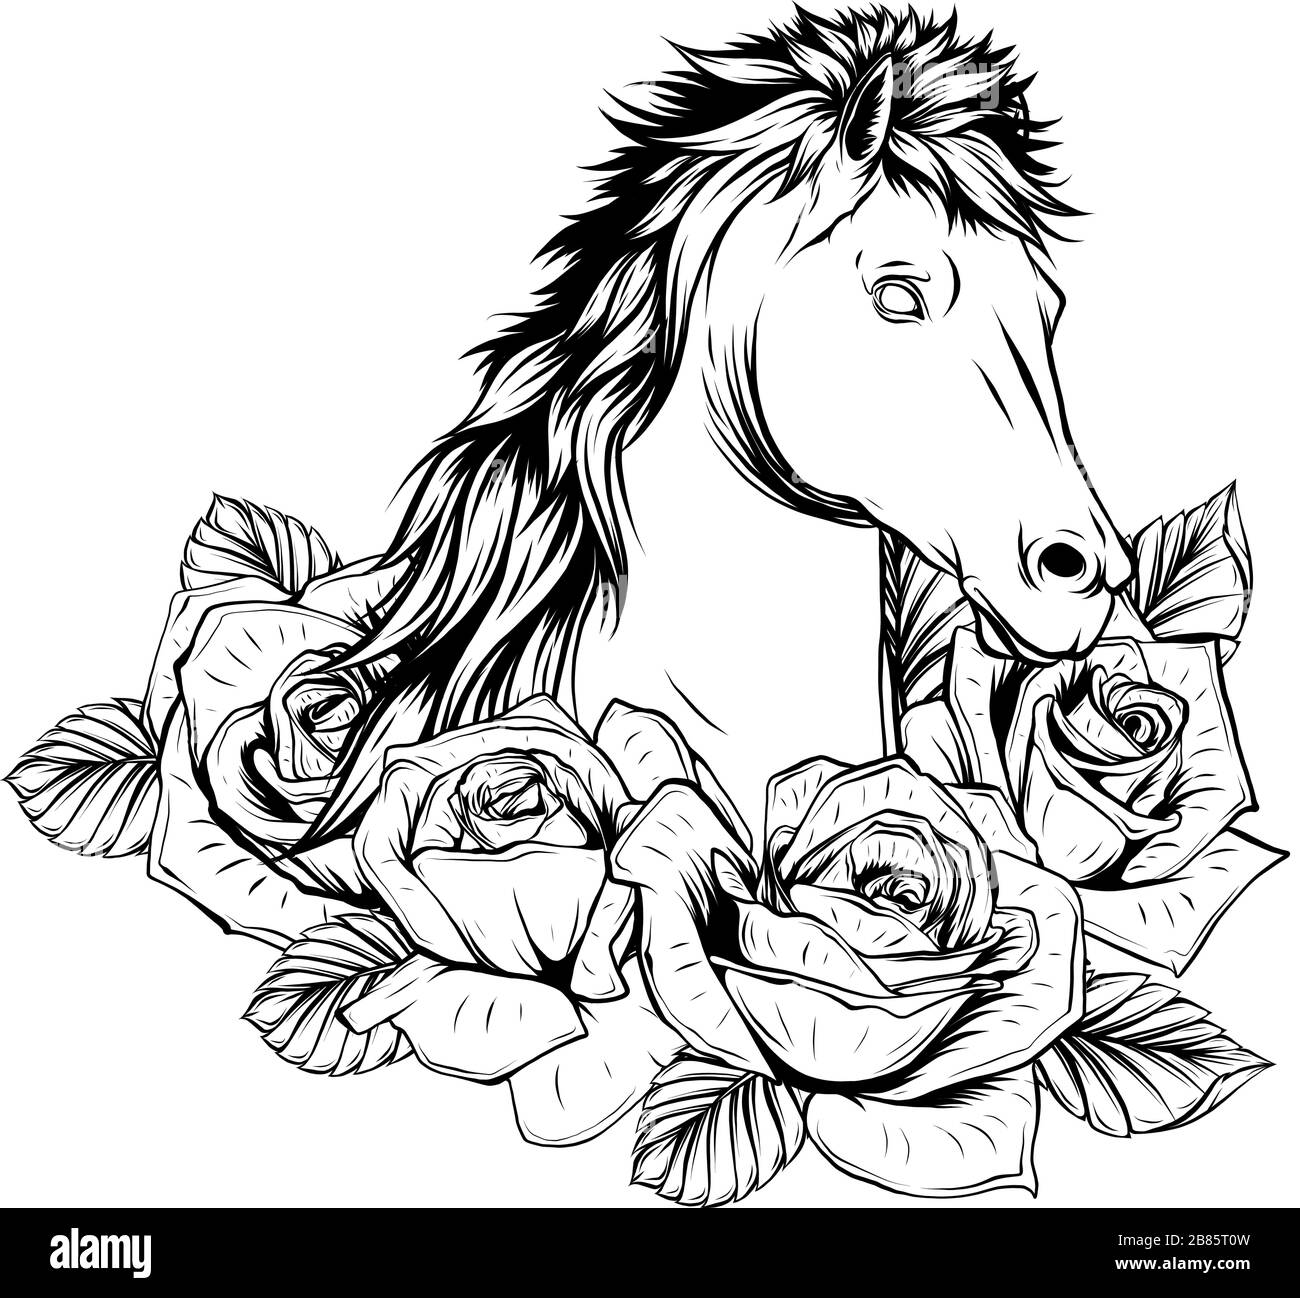 Beautiful horse with roses. Vector drawn illustration Stock Vector